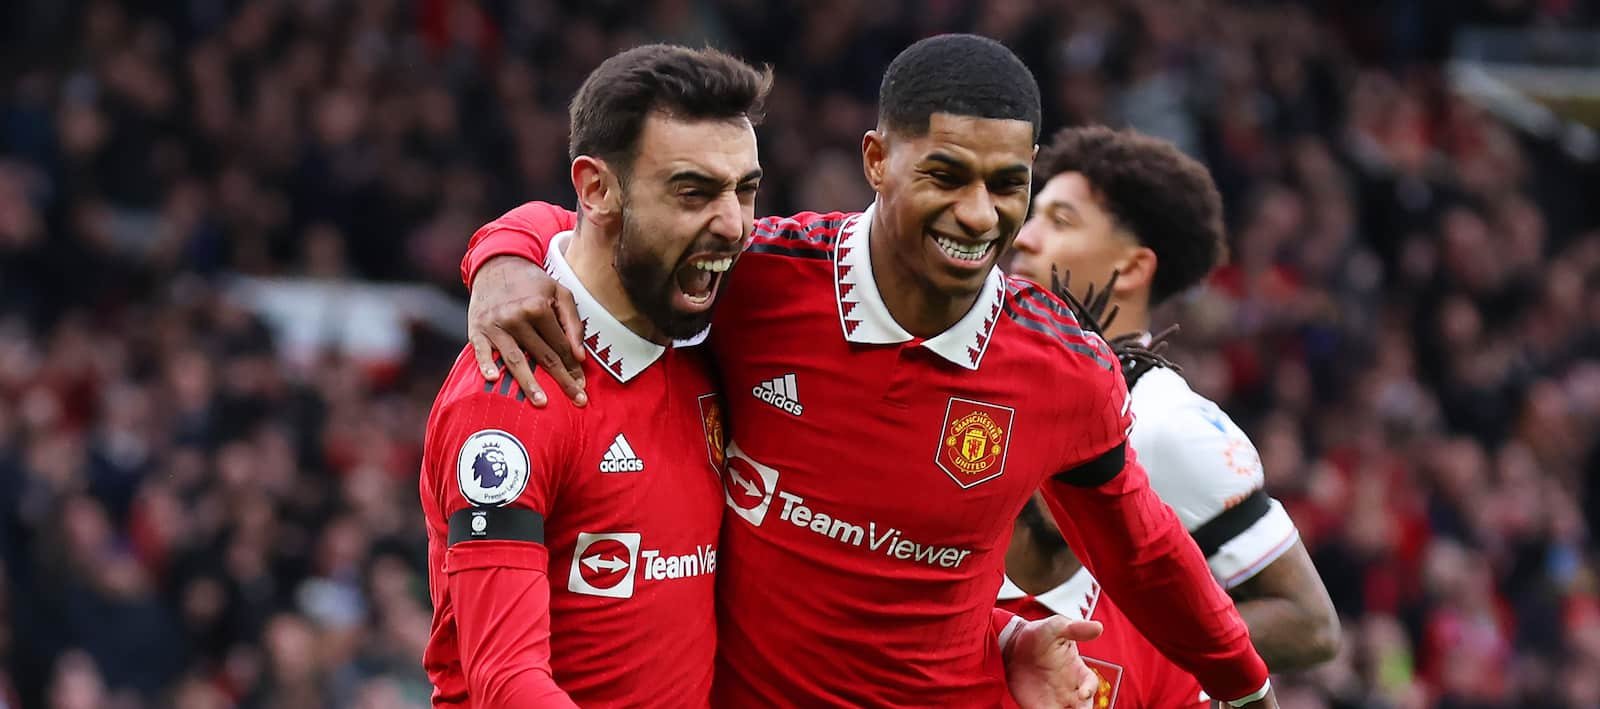 Erik ten Hag rushes to Bruno Fernandes’ defence on Marcus Rashford penalty incident – Man United News And Transfer News